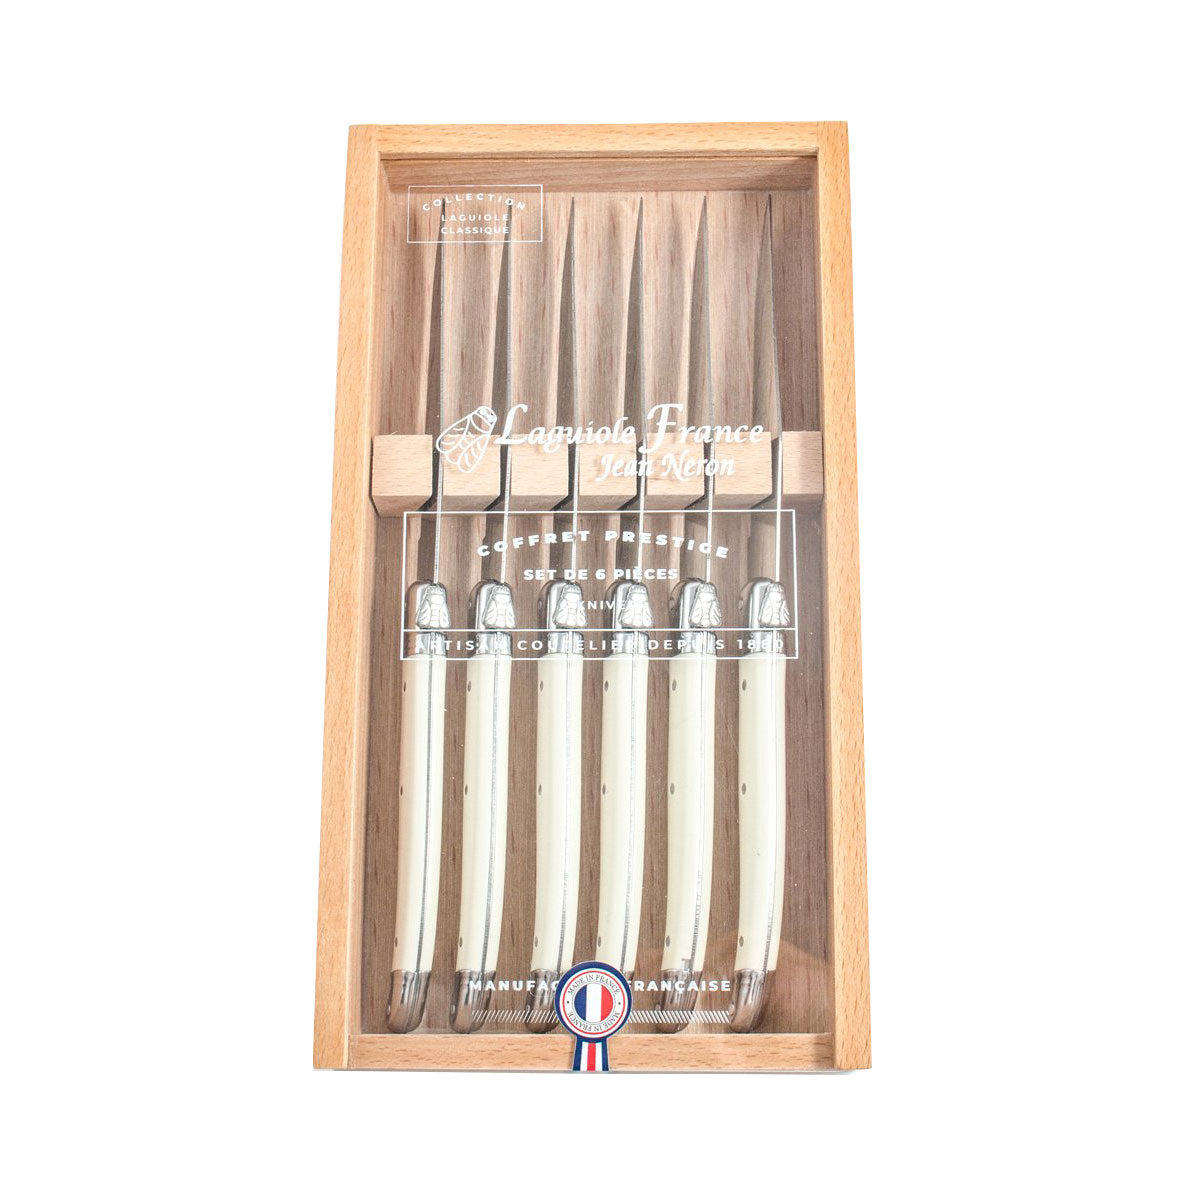 Laguiole Ivory Knives in Wooden Box with Acrylic Lid (Set of 6) Cutlery Laguiole Brand_Laguiole Kitchen_Dinnerware Kitchen_Kitchenware Knife Sets Laguiole Spring Collection 7900-60540M_I_AL-Laguiole-Ivory-Knives-Set-of-6-with-Acrylic-Lid_Web